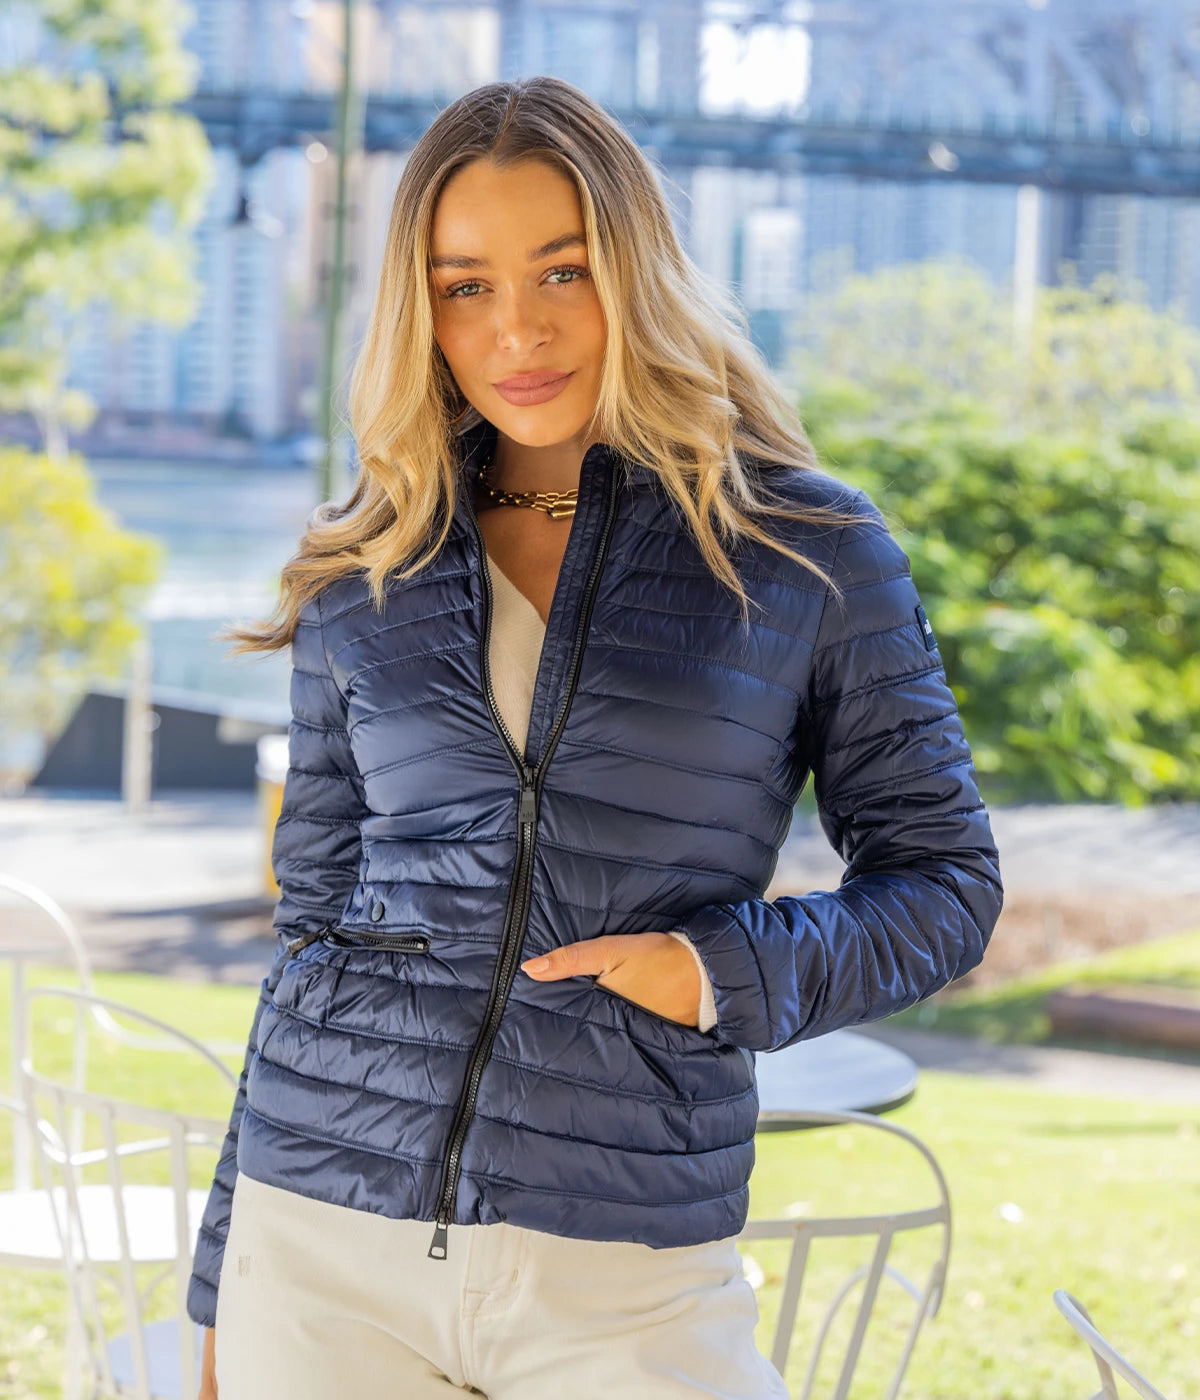 Down Jacket with Detachable Hood in Midnight Blue